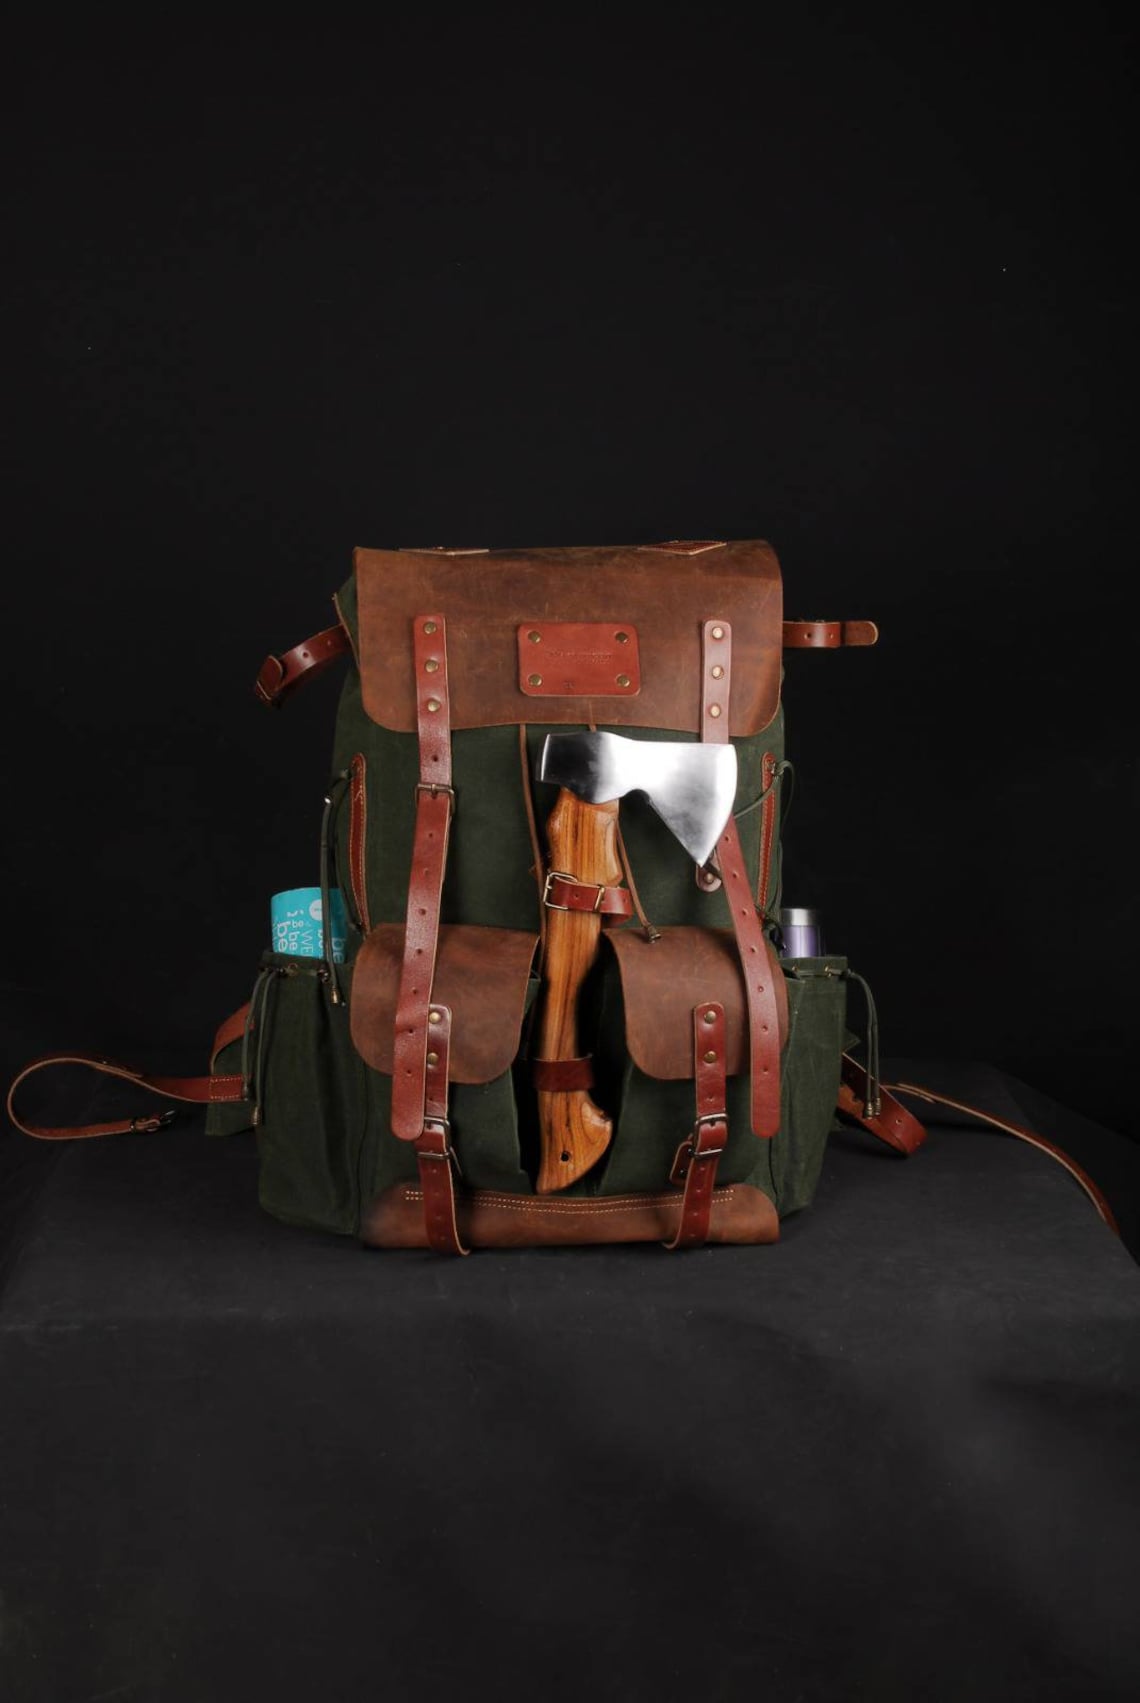 Bushcraft Handmade Leather and Canvas Backpack for Travel, Camping, Hiking, Hunting | 50 Liters | Birthday Gift | Gift For Him  | bushcraft - camping - hiking backpack 99percenthandmade   